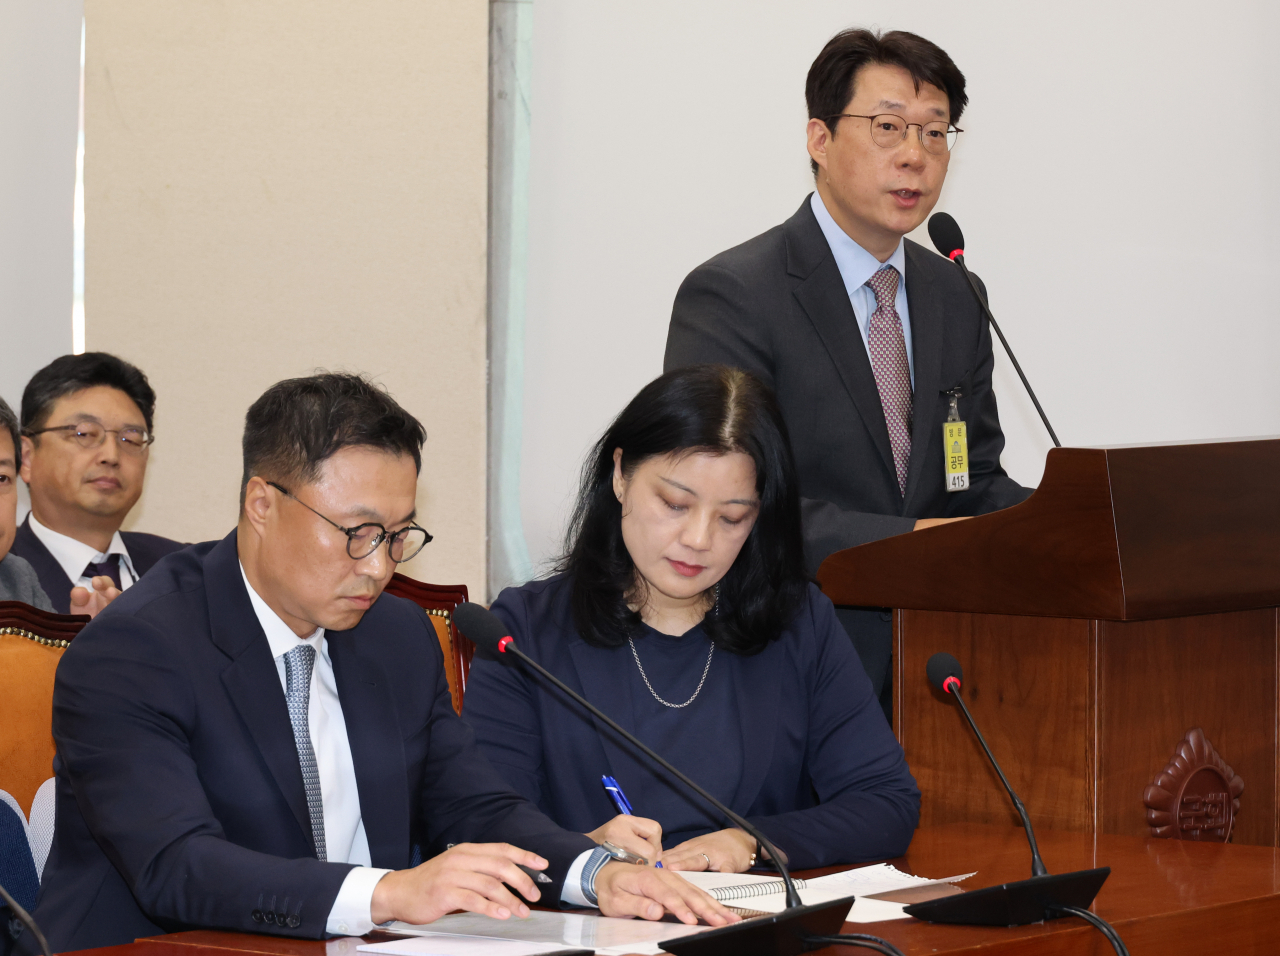 Kim Deok-hwan, CEO of Hyundai Card (right) and Apple Korea President Mark Lee (left) and a translator attend a parliamentary audit on Oct. 11. (Yonhap)